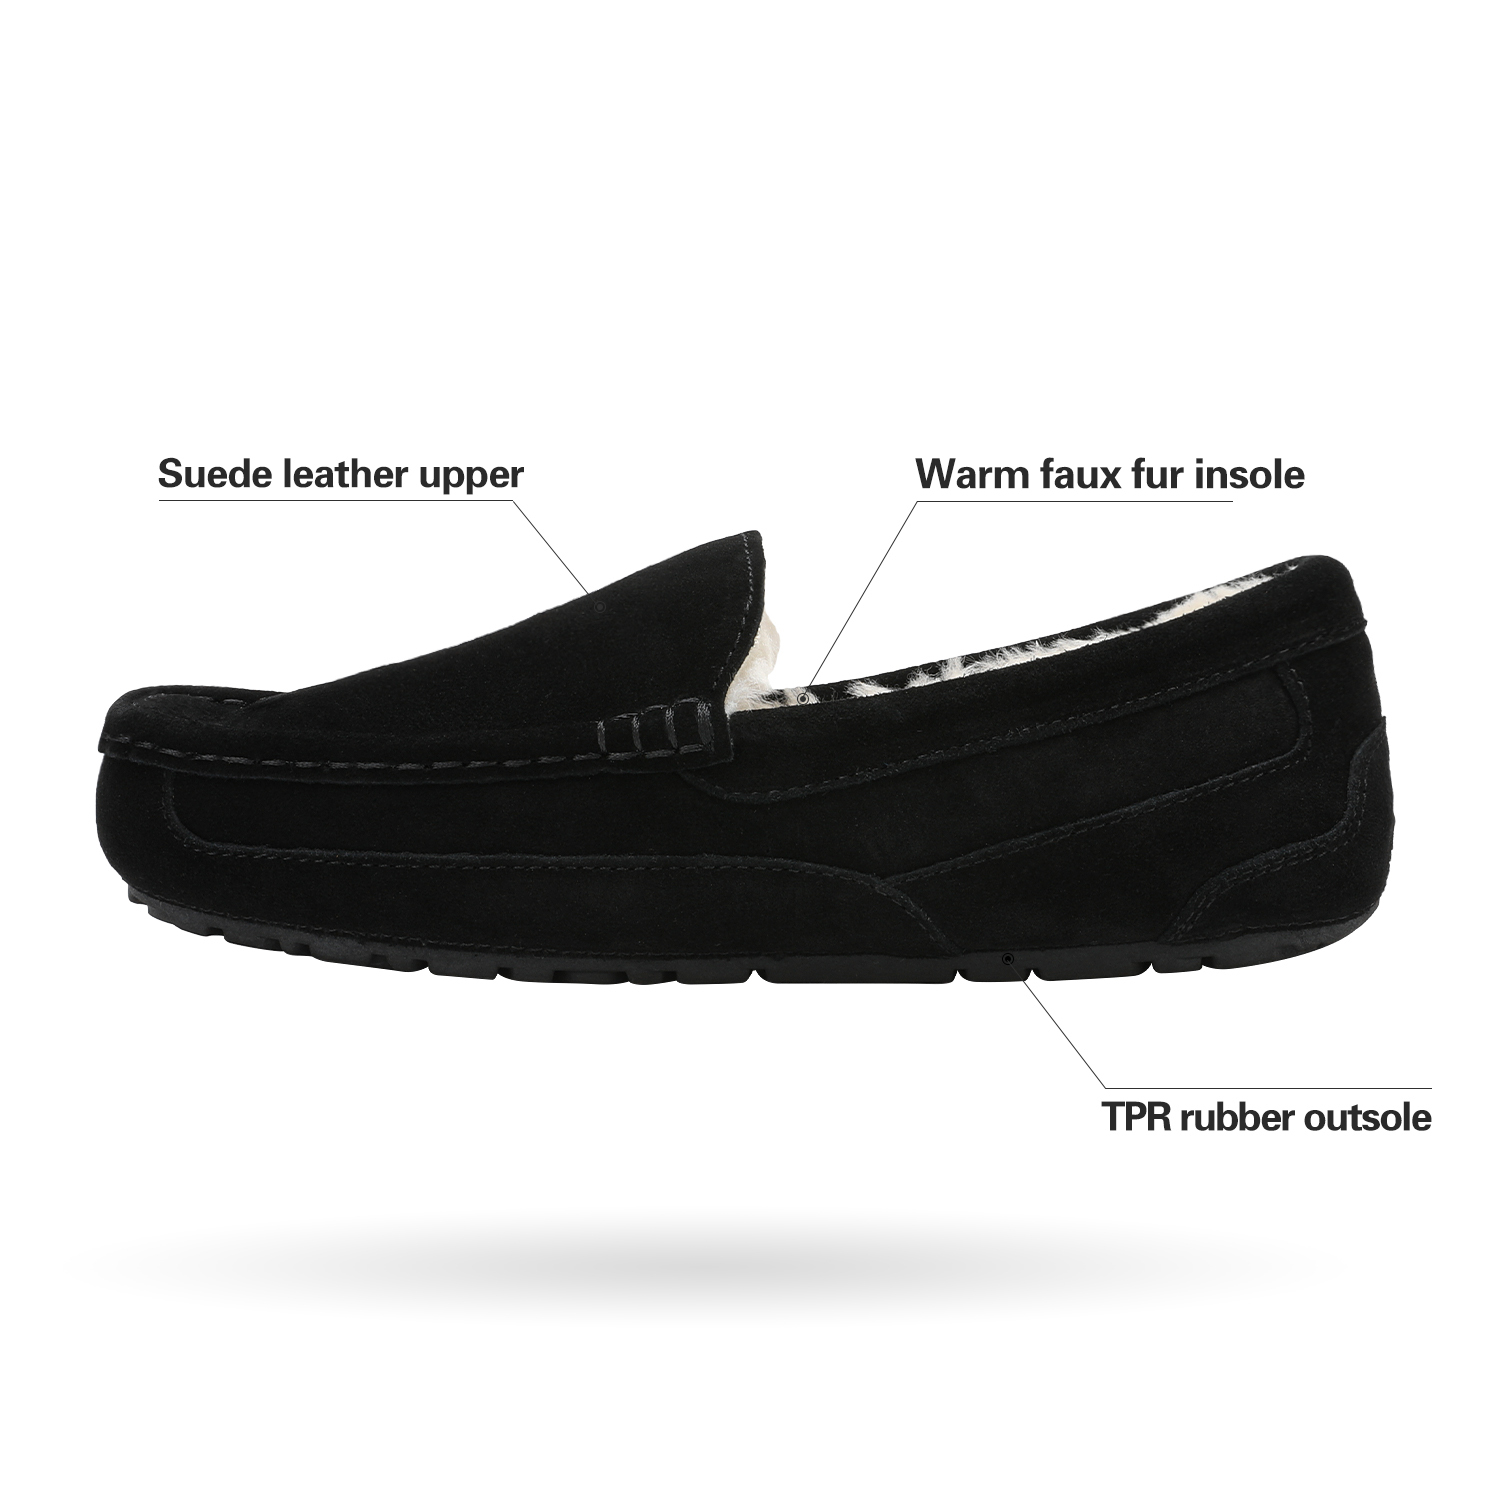 Dream Pairs New Soft Mens Au-Loafer Indoor Warm Moccasins Slippers Flats Shoes Au-Loafer-01 Black Size 7 - image 3 of 5